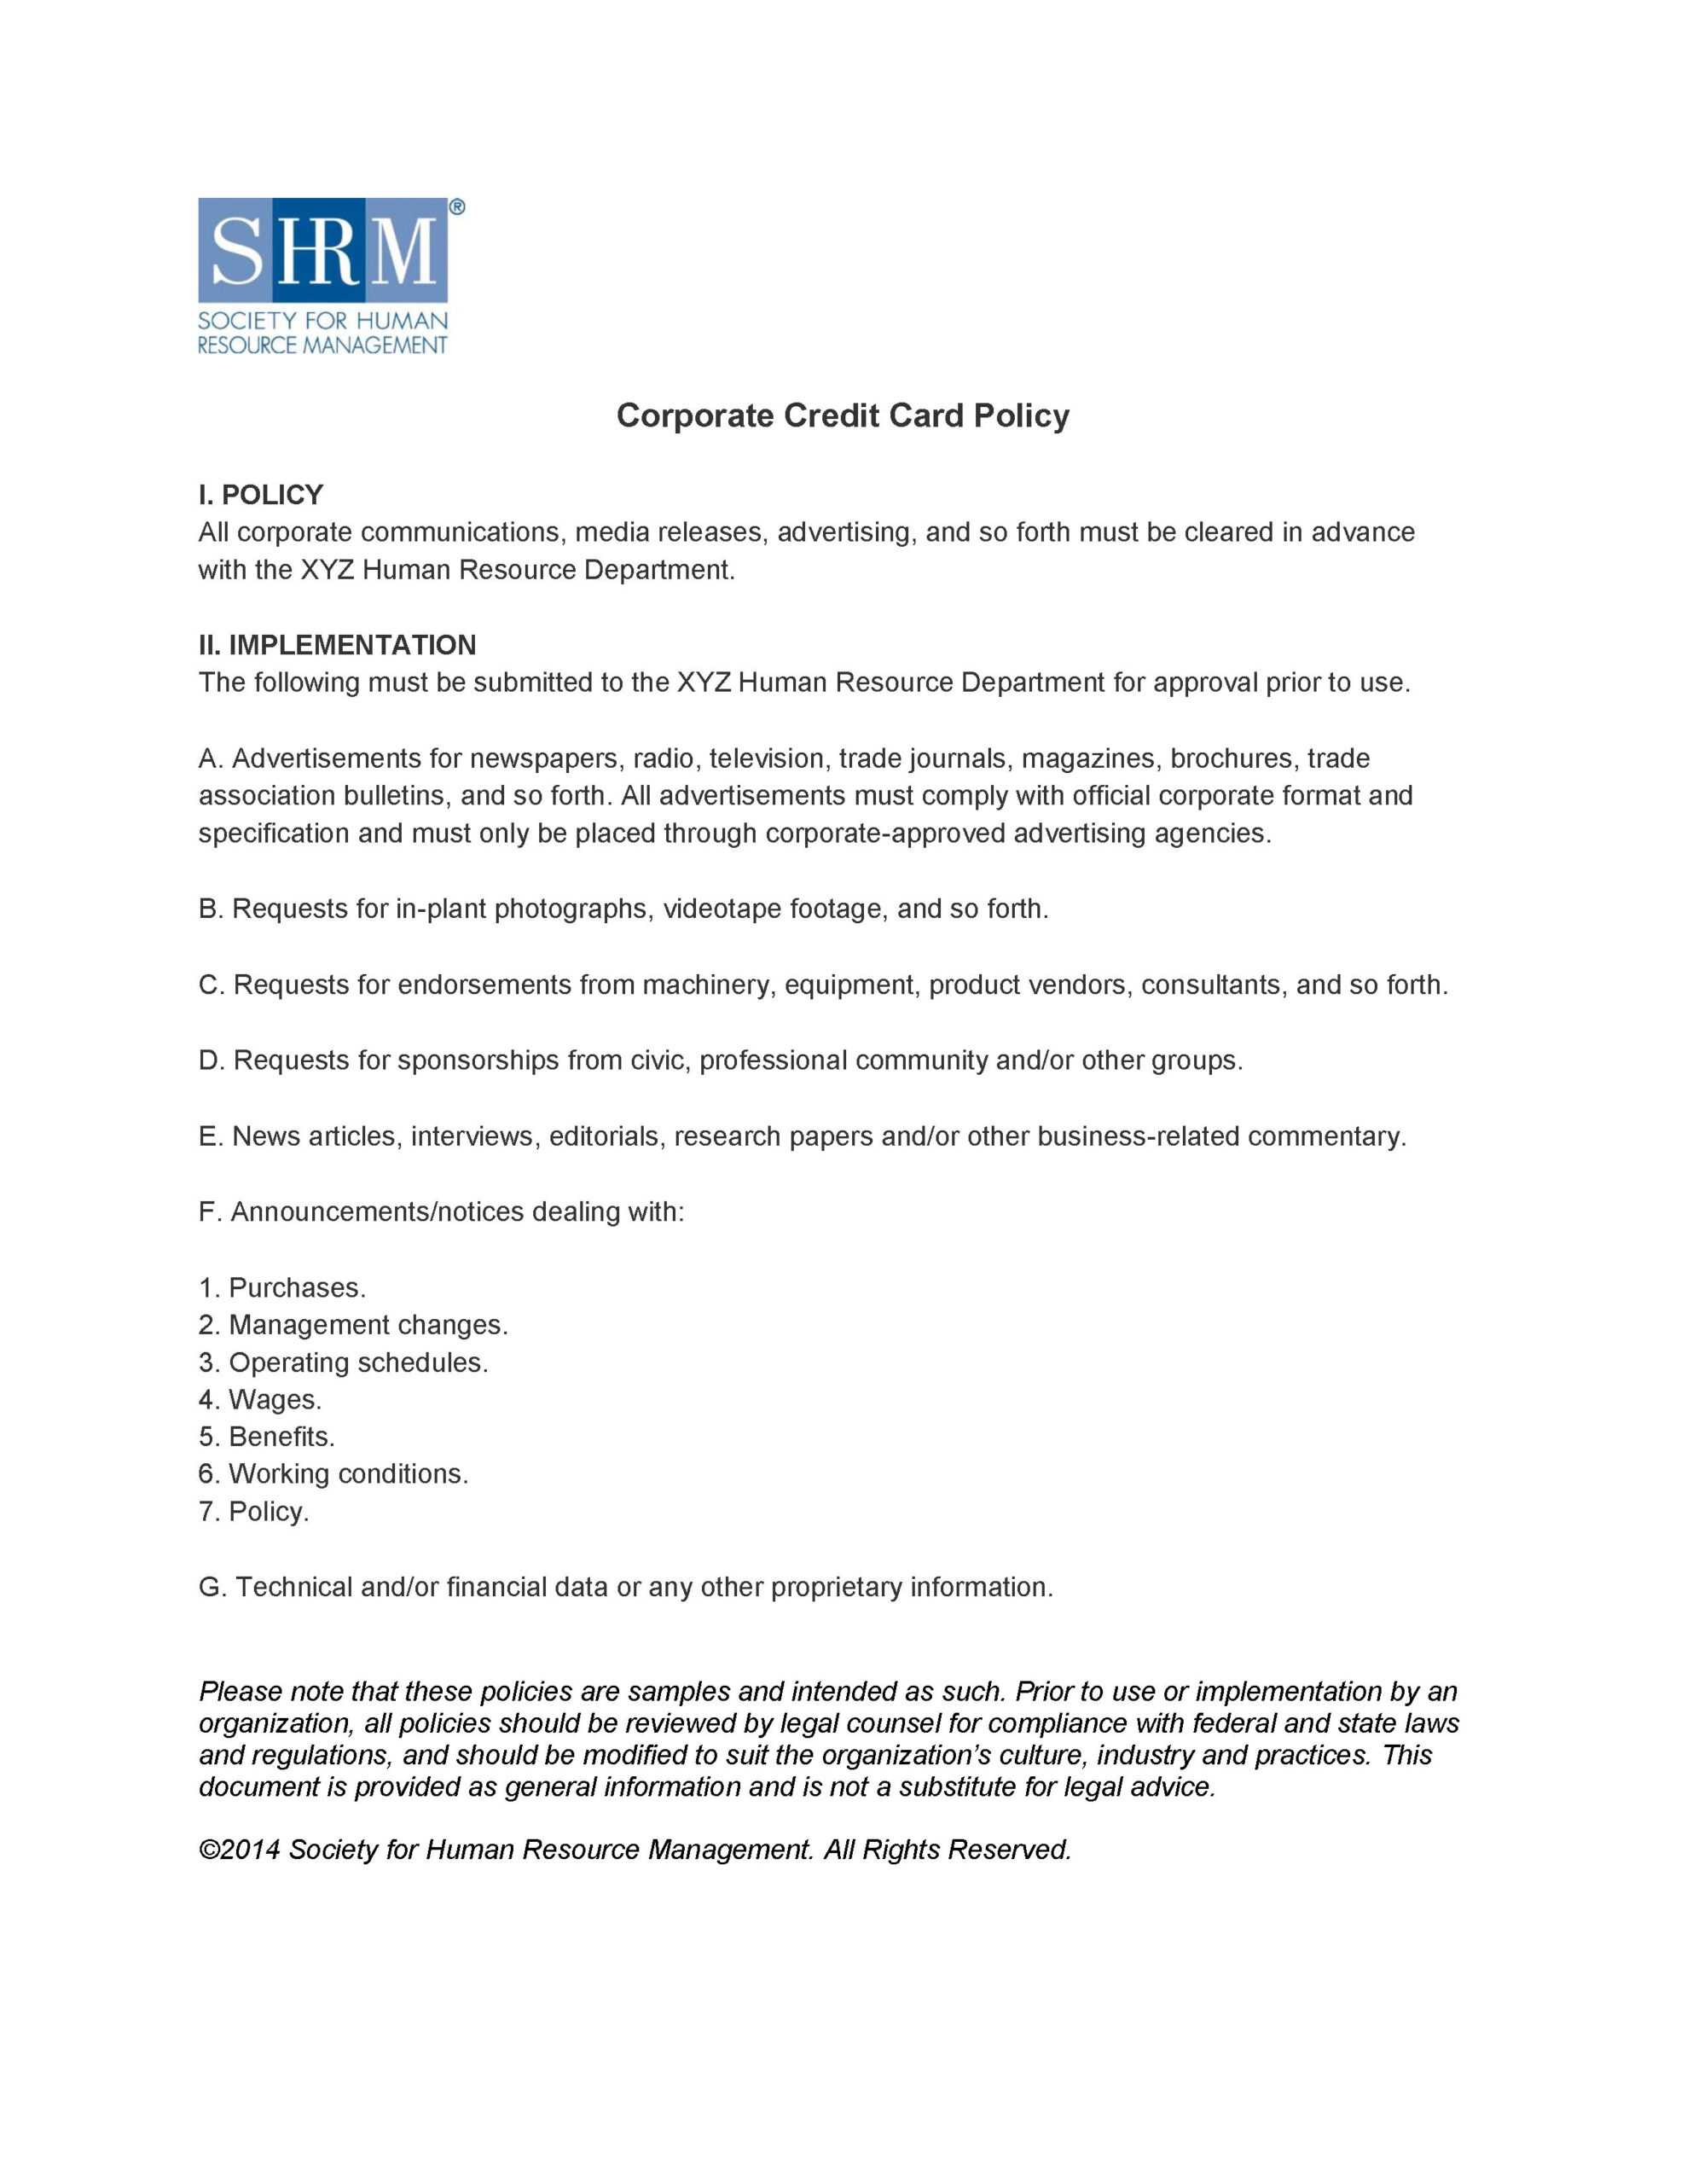 Corporate Credit Card Policy | Alexander Street, A Proquest Within Company Credit Card Policy Template